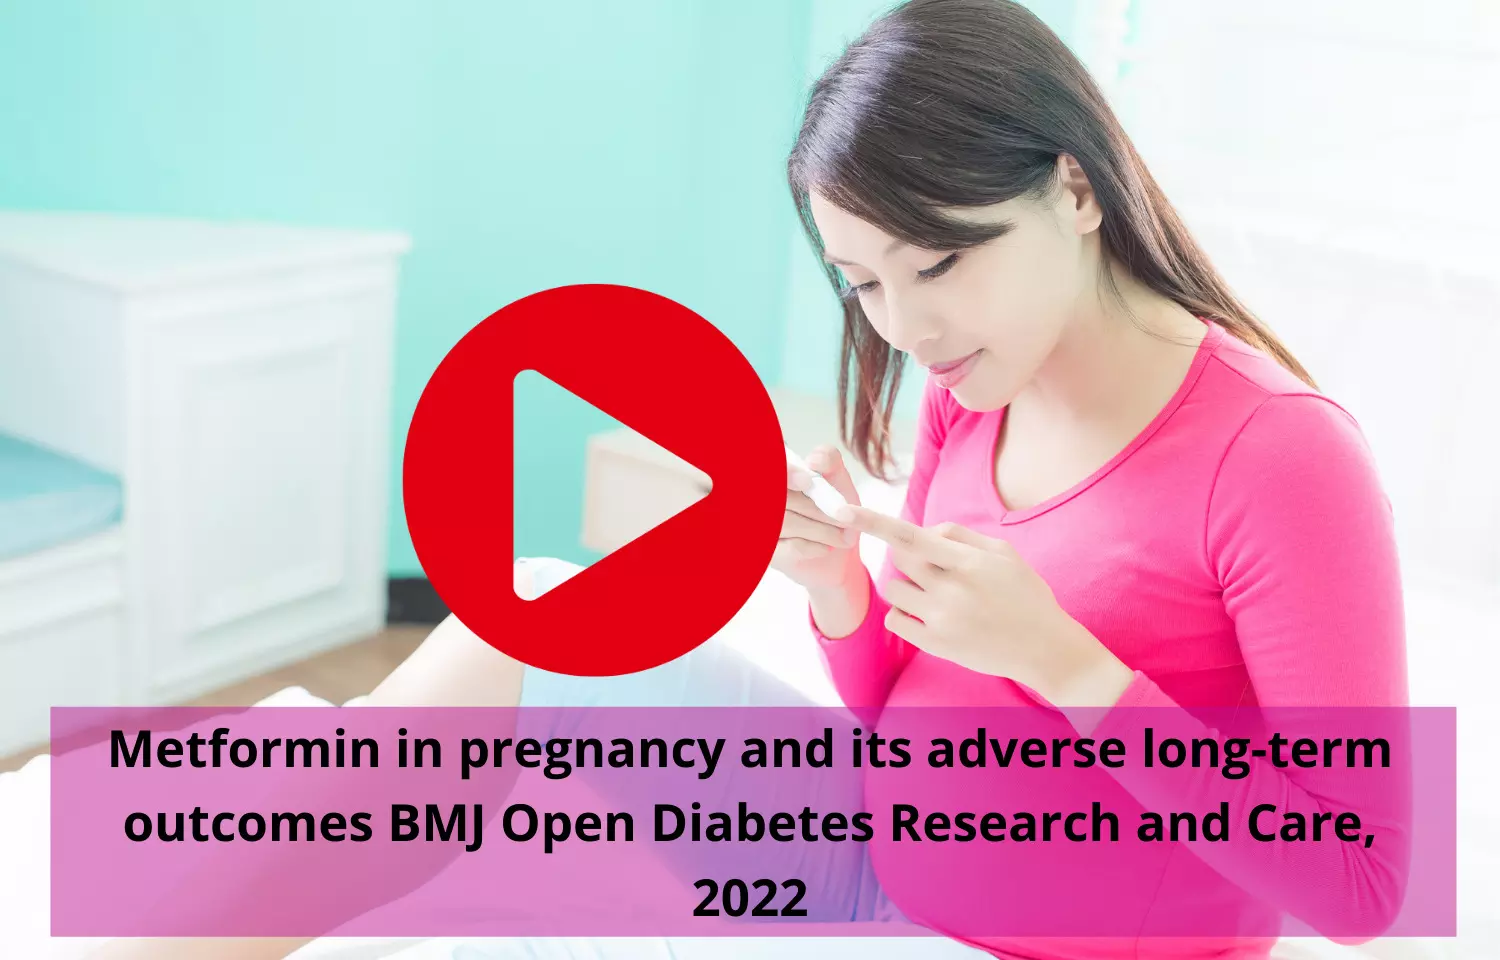 Metformin in pregnancy and its adverse long-term outcomes, BMJ study